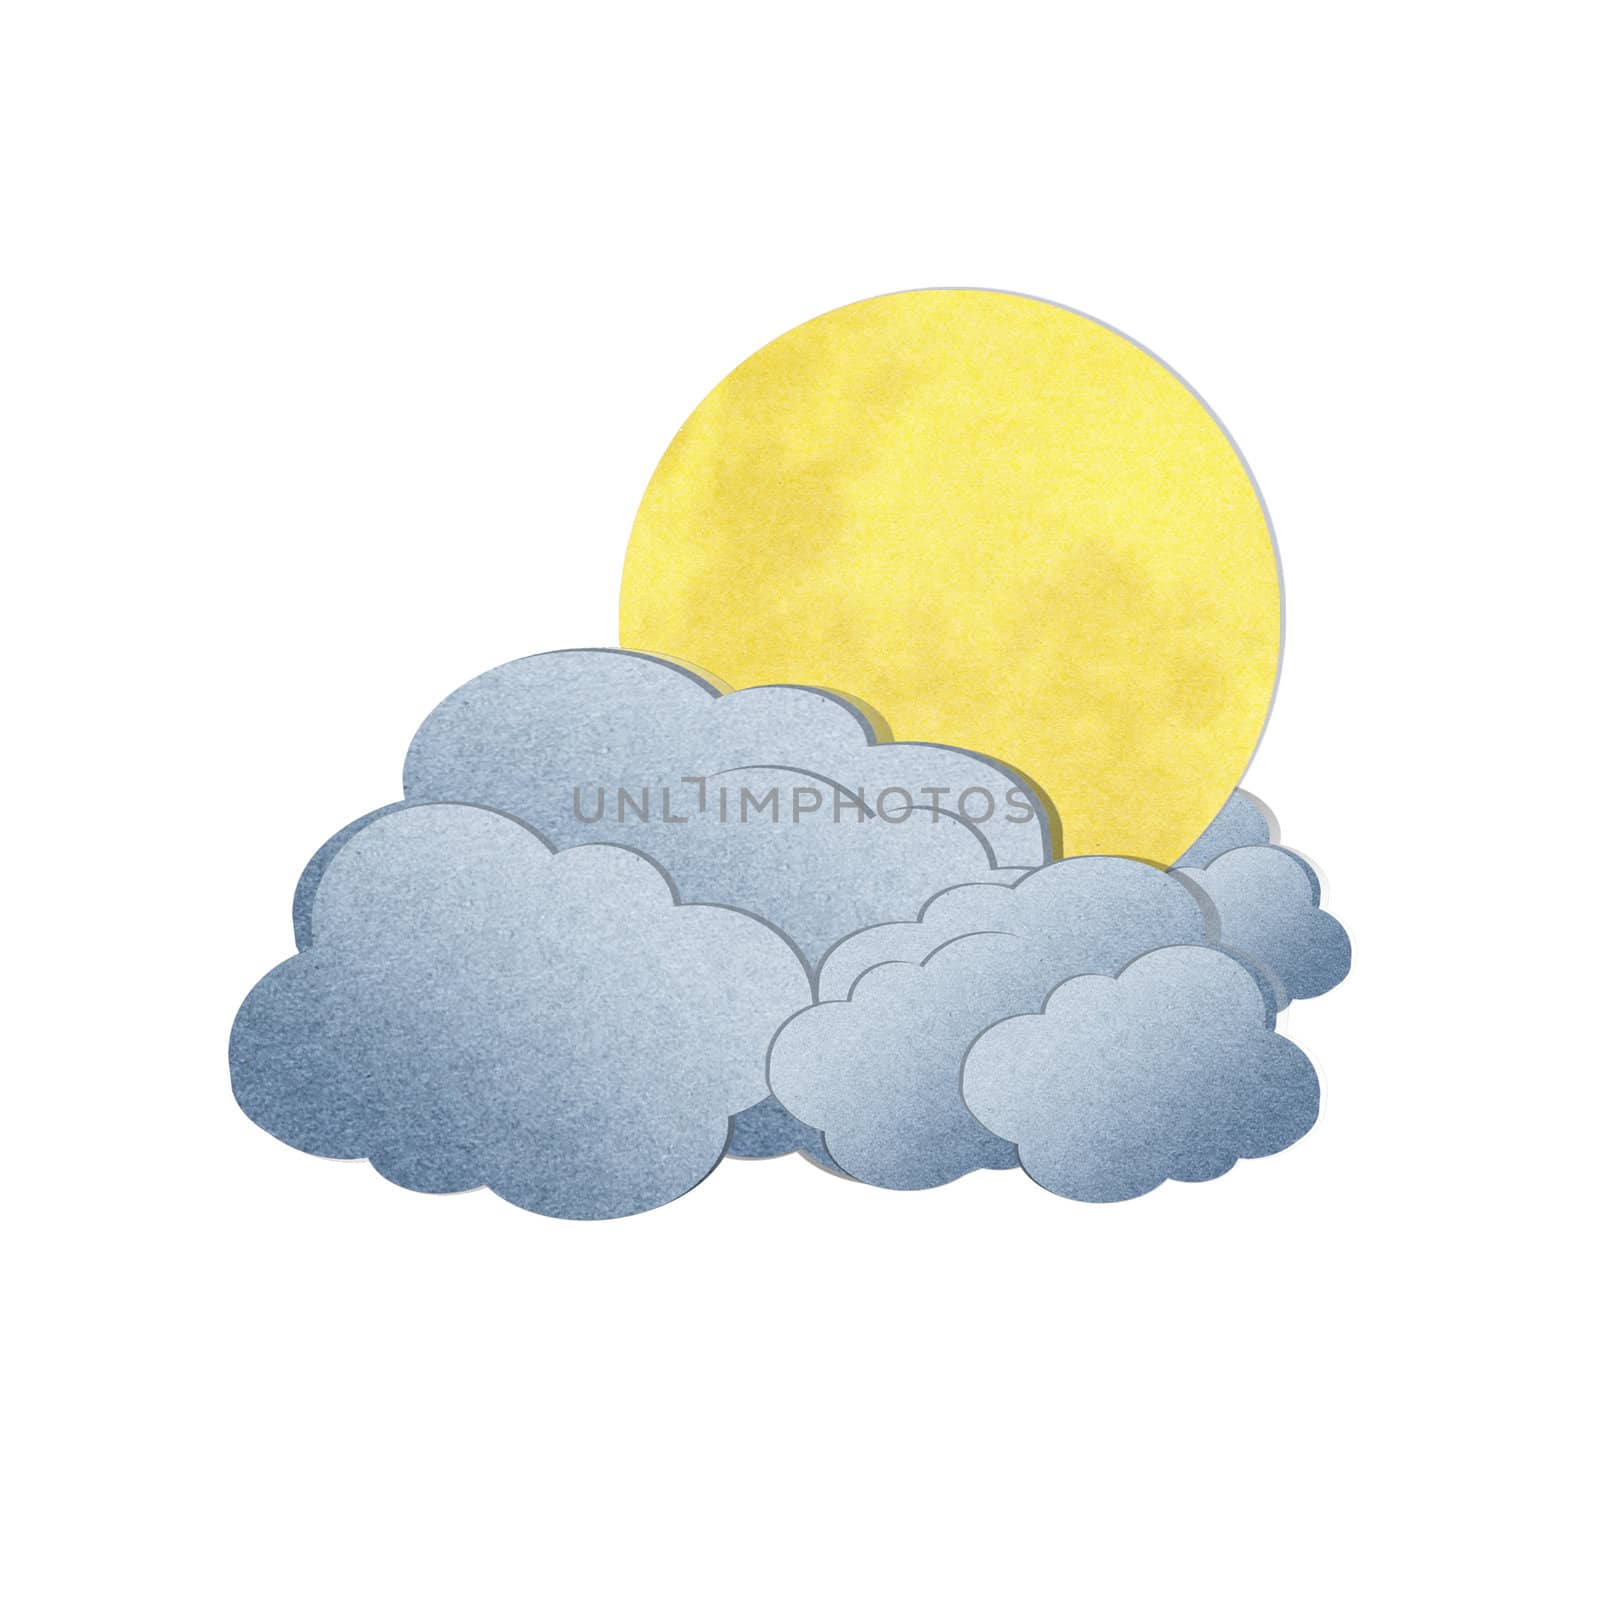  Grunge recycled paper moon and cloud on white background by jakgree